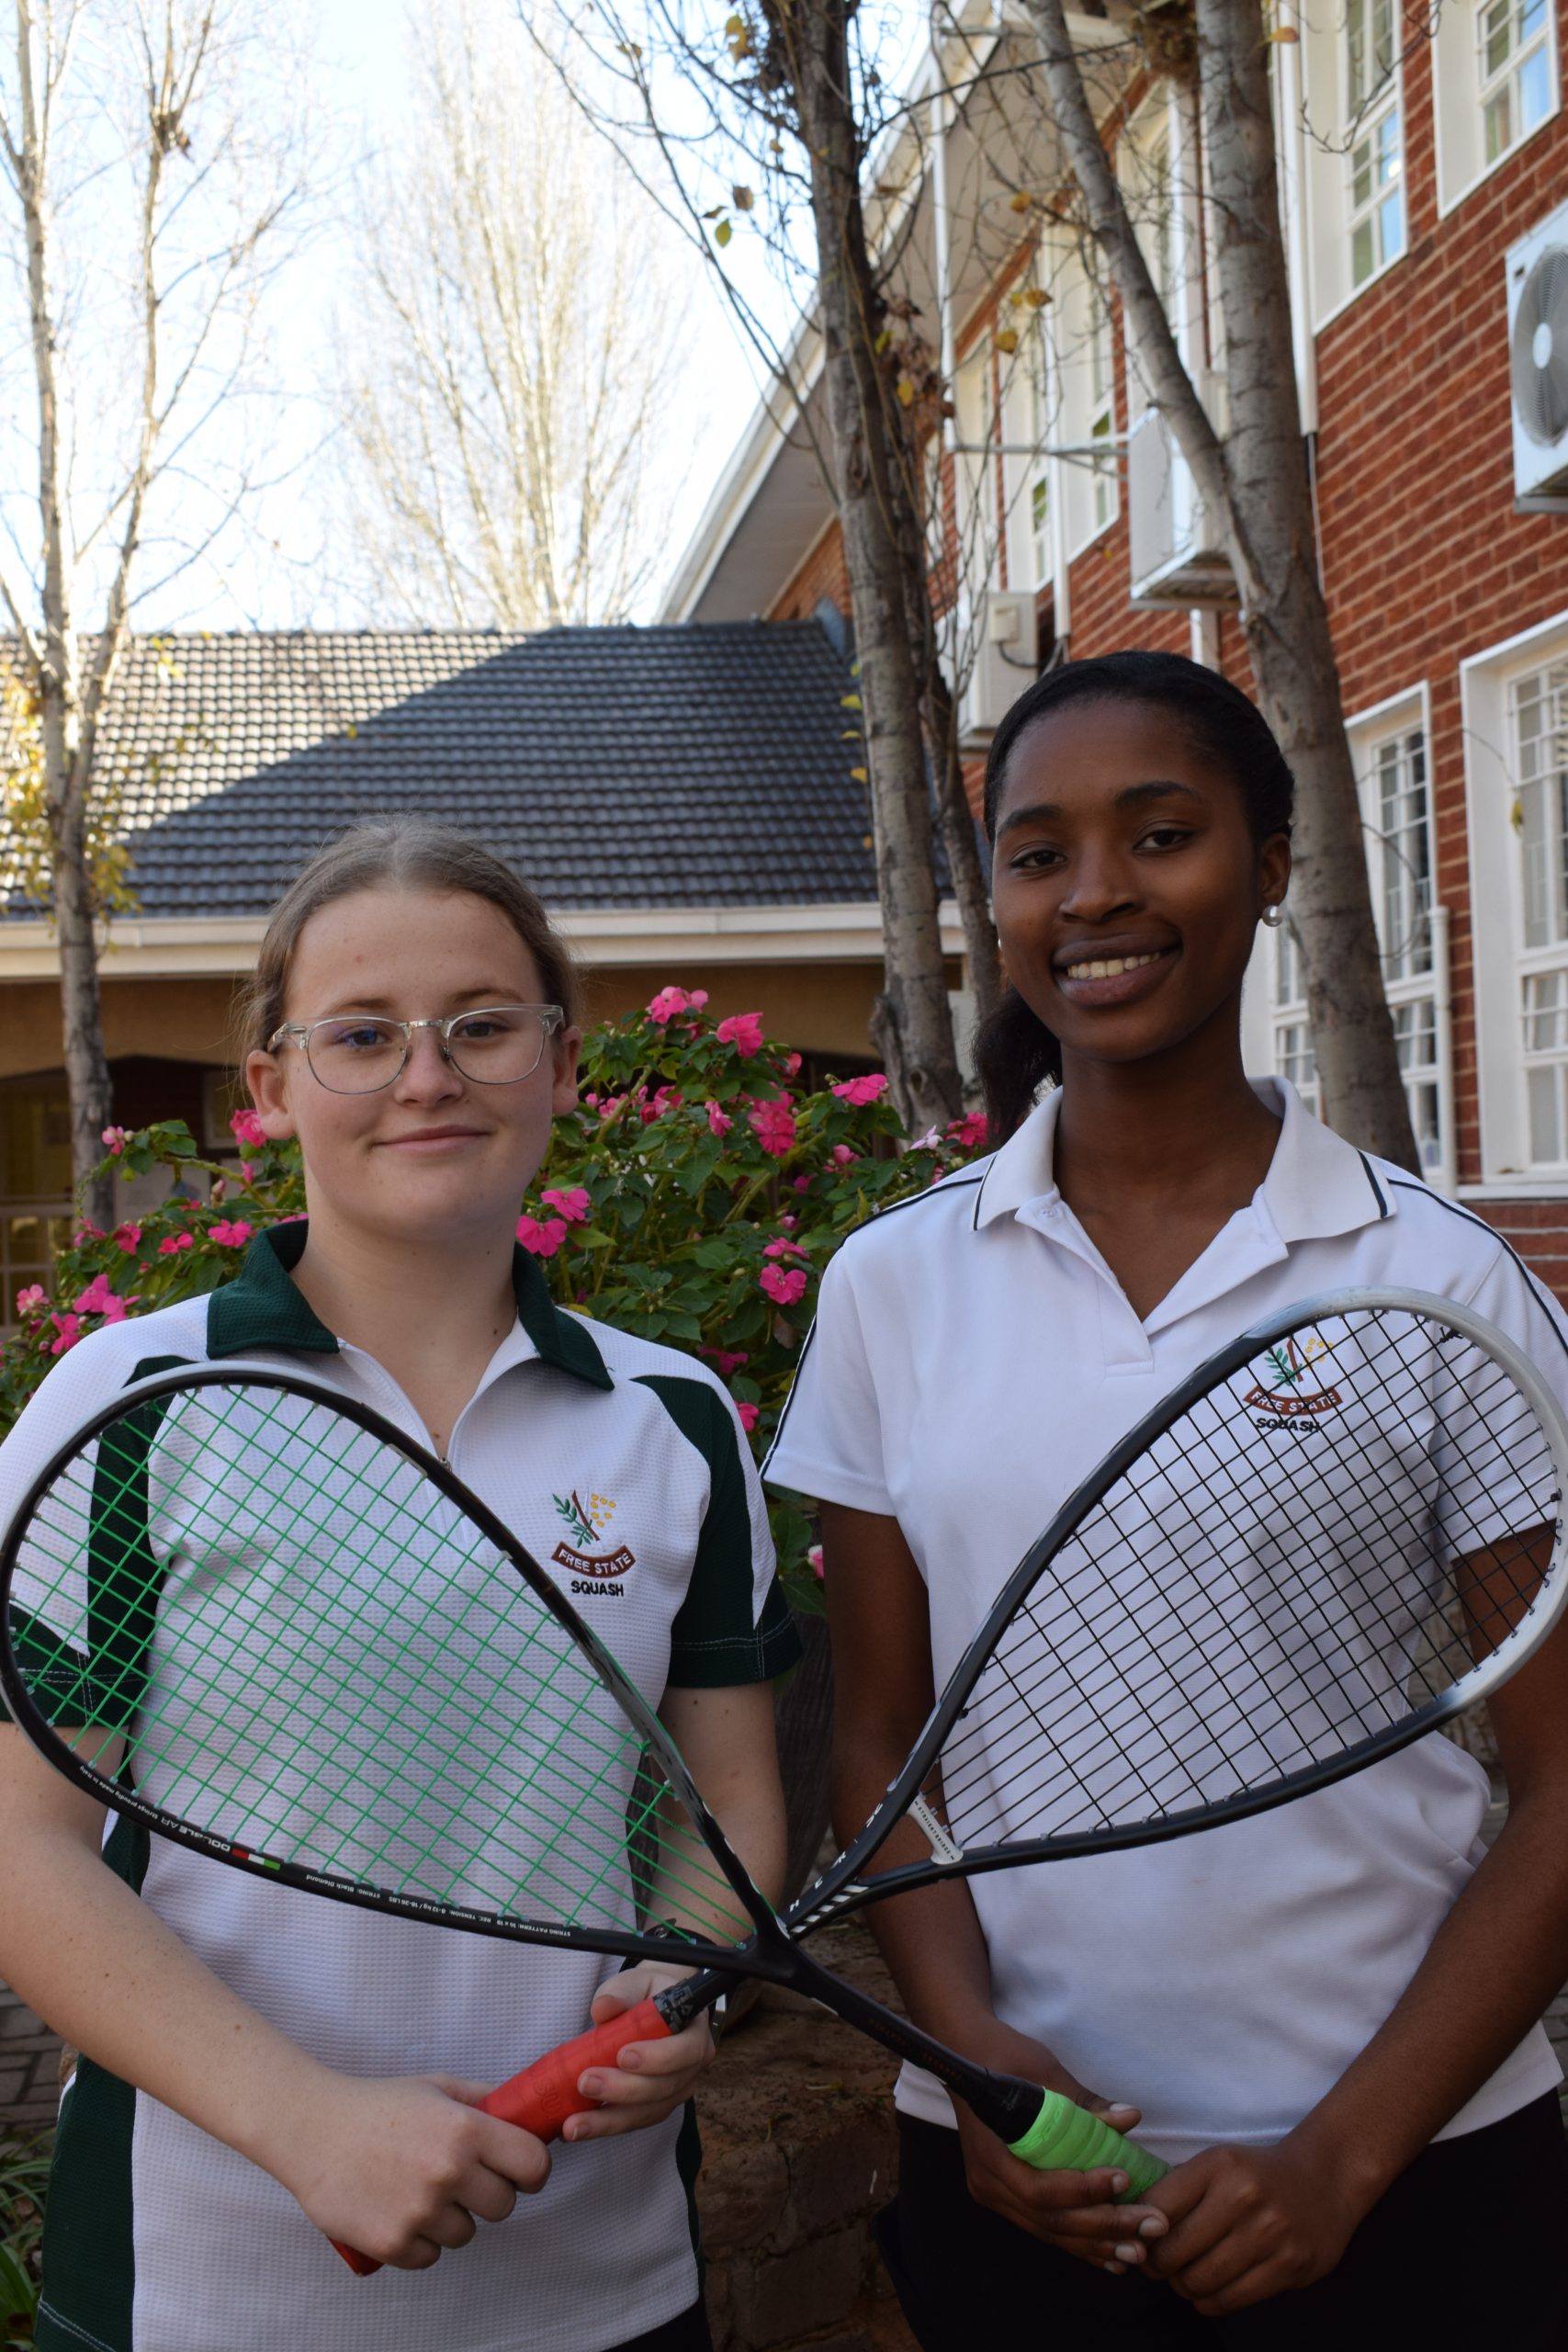 Squash players represent the Free State